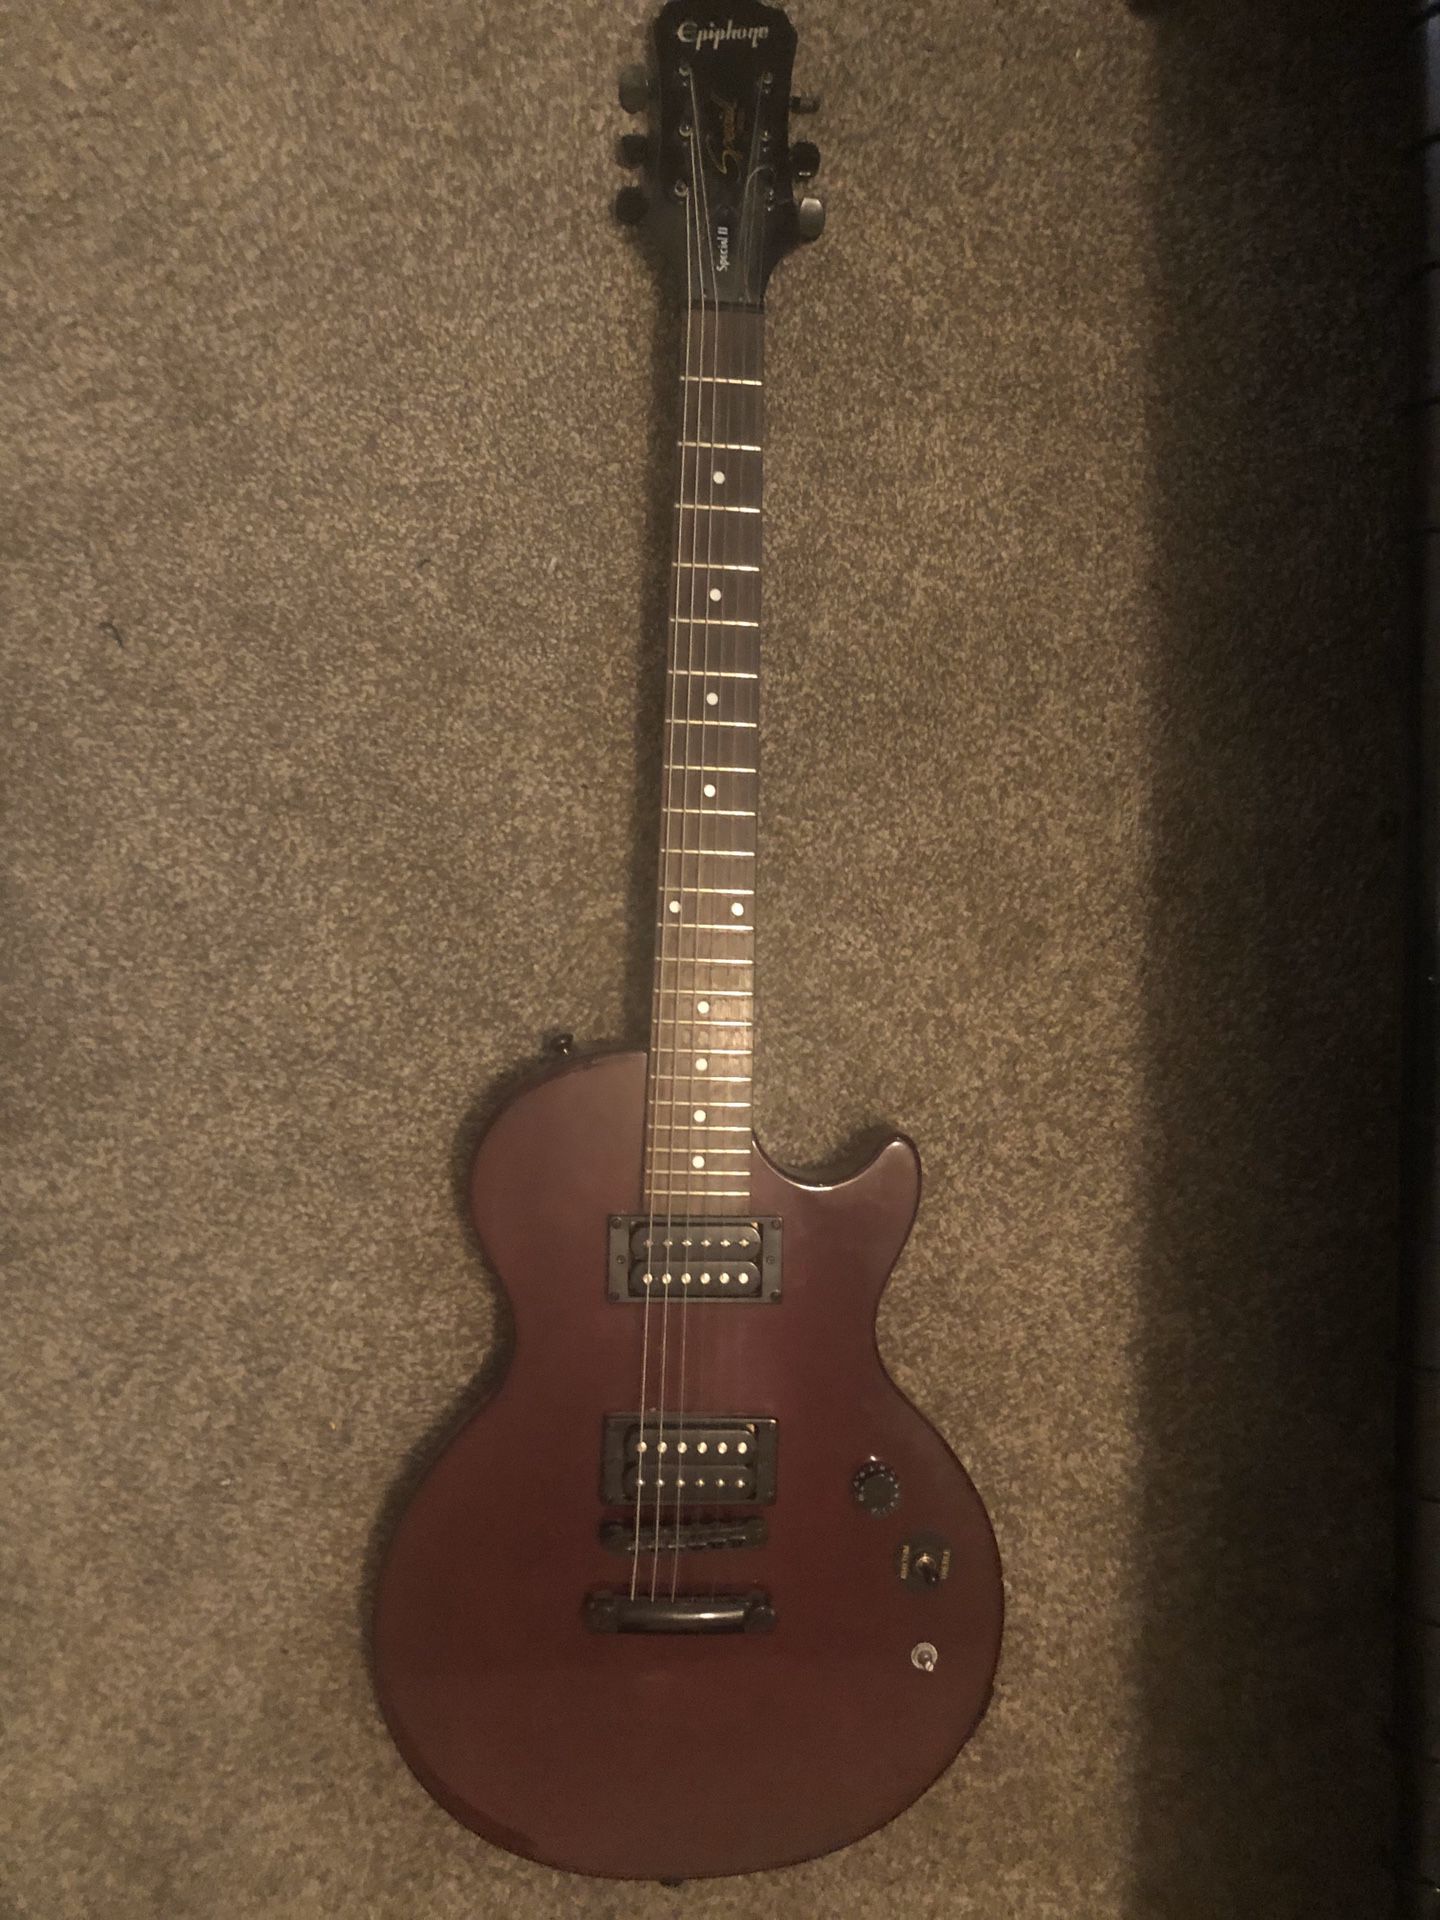 Epiphone special electric guitar